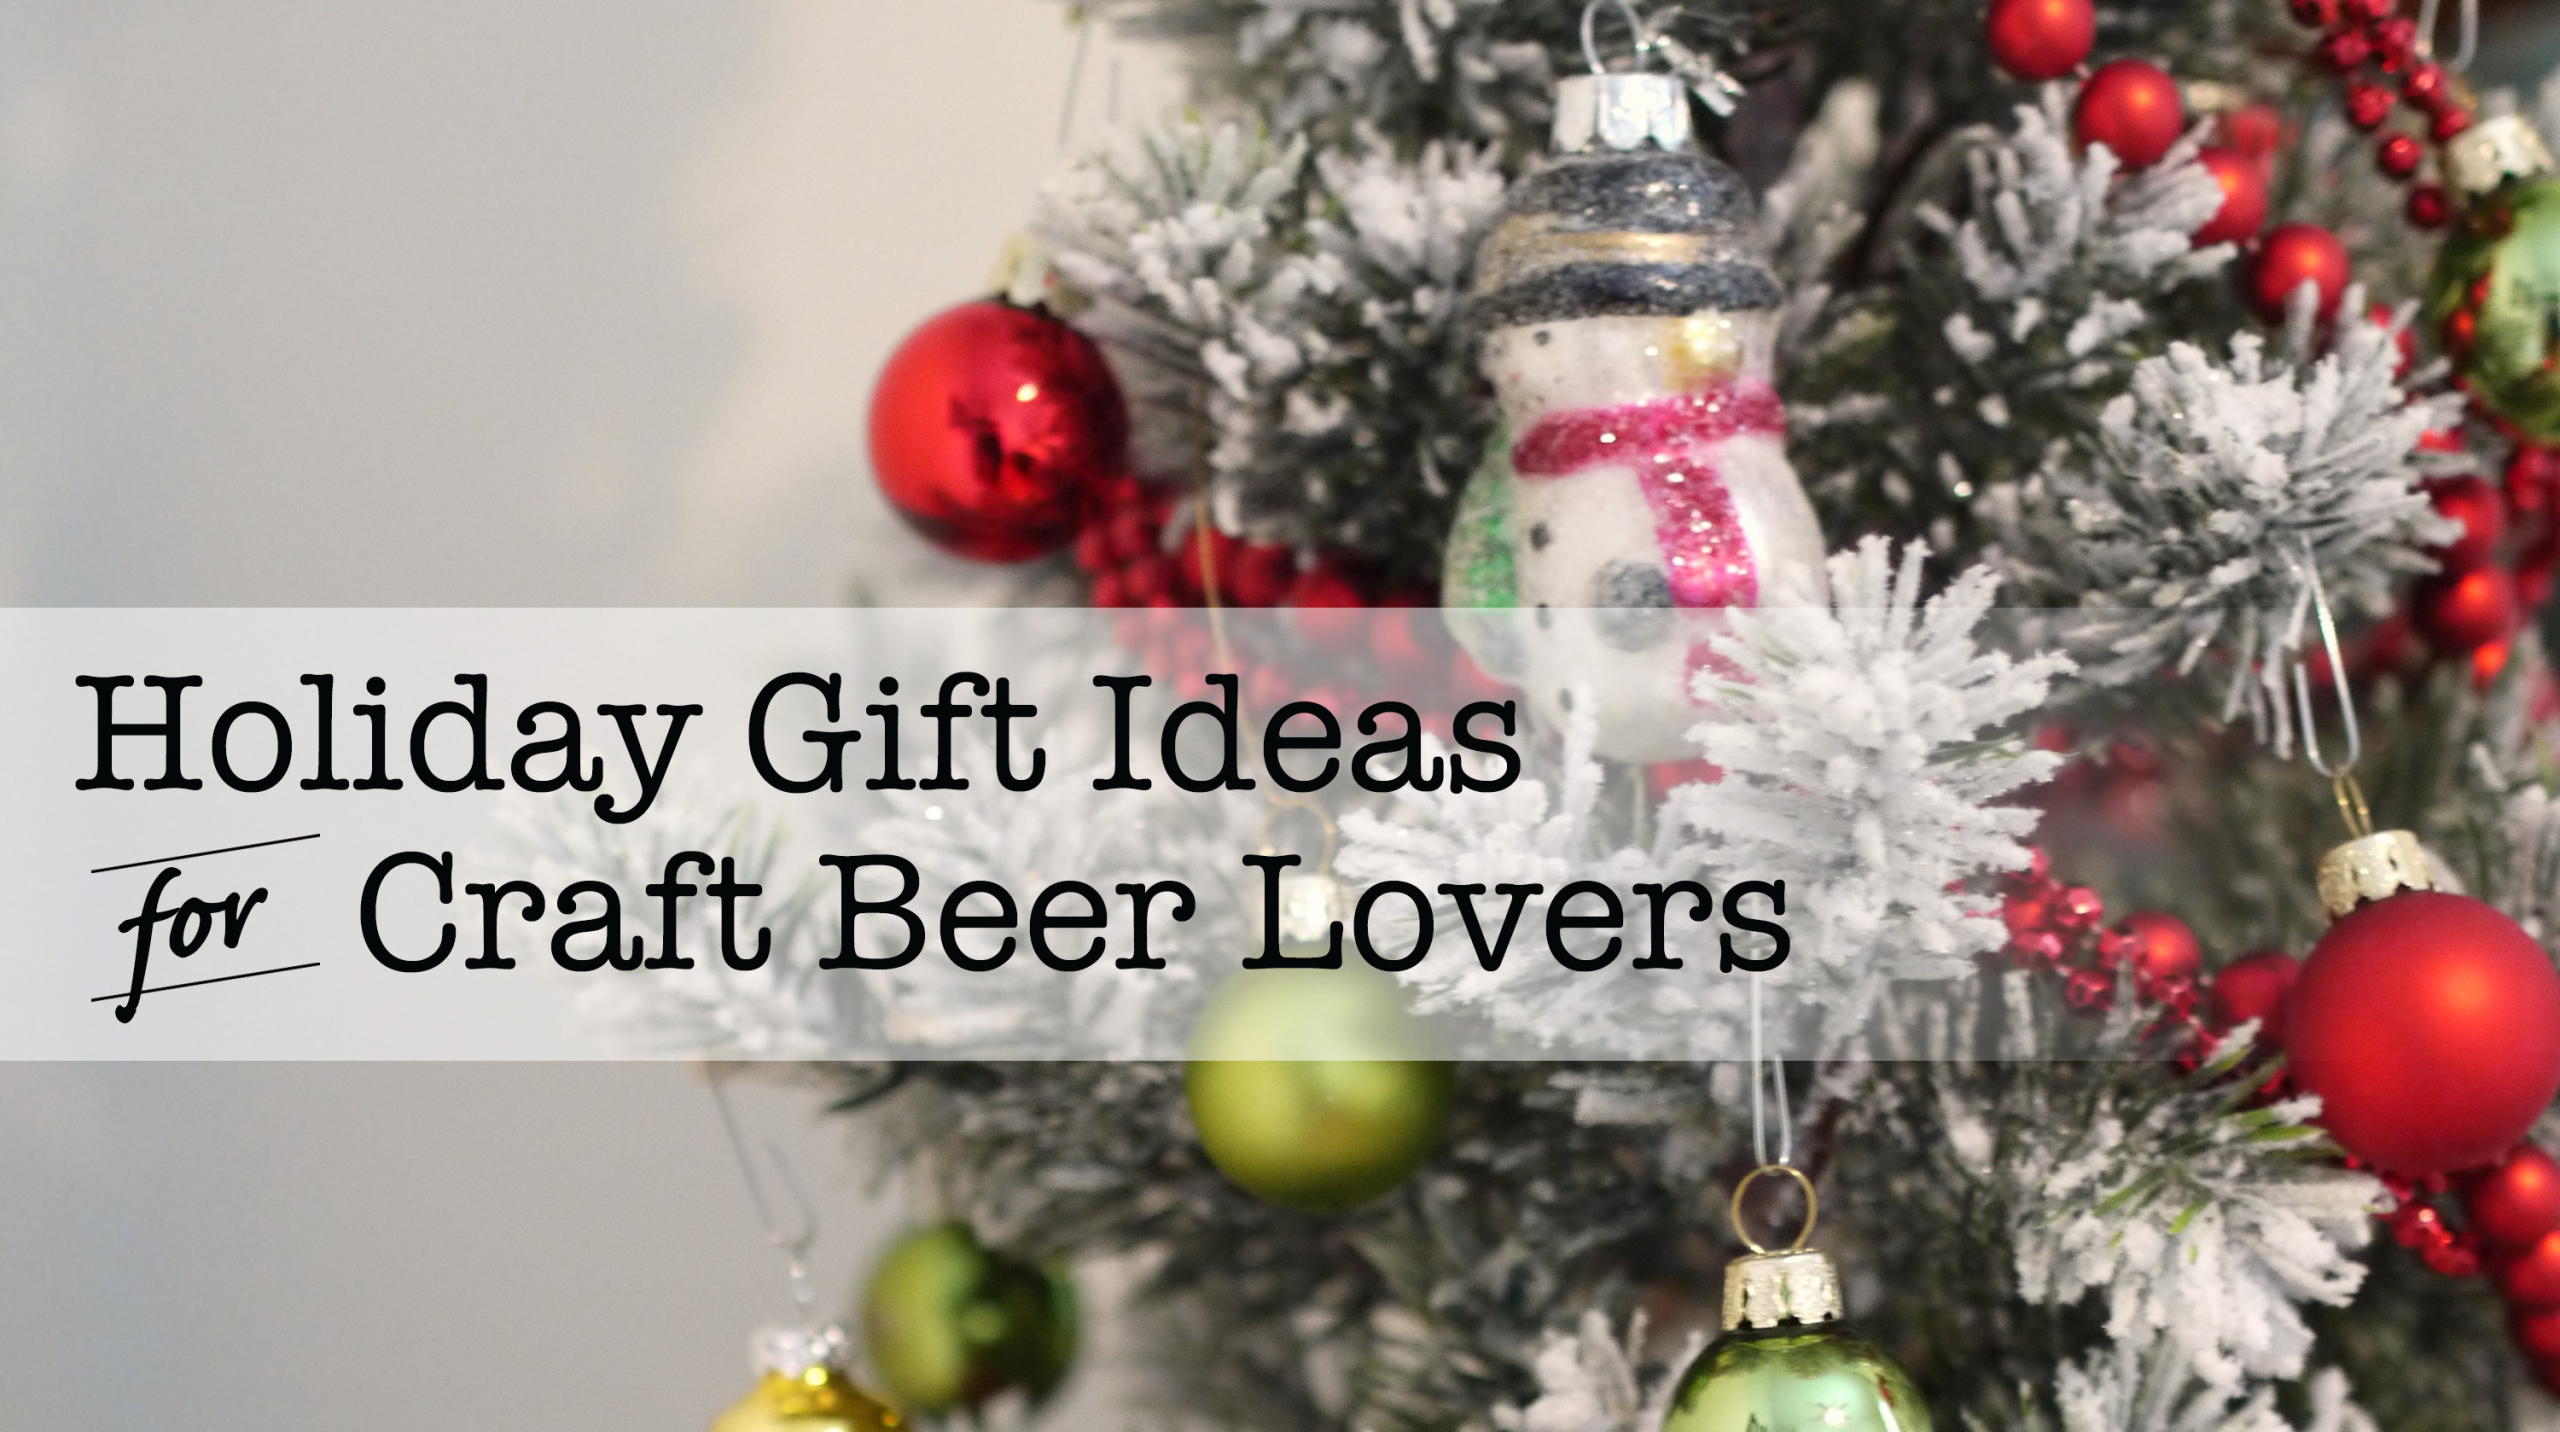 Gift Ideas For Craft Beer Lovers
 2016 Holiday Gift Ideas for Craft Beer Lovers Stouts and